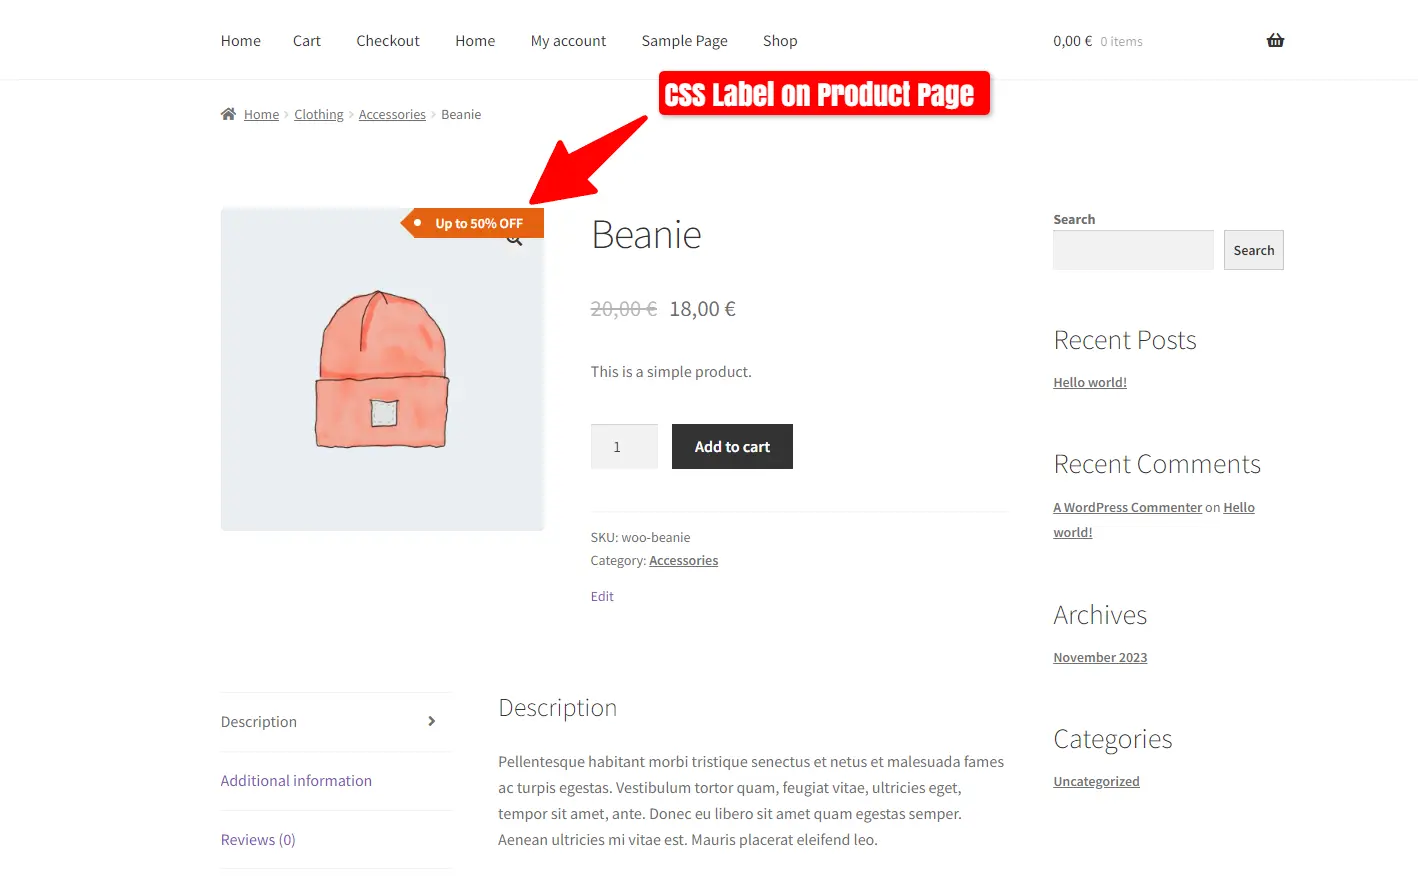 CSS Label on Beanie Product Page